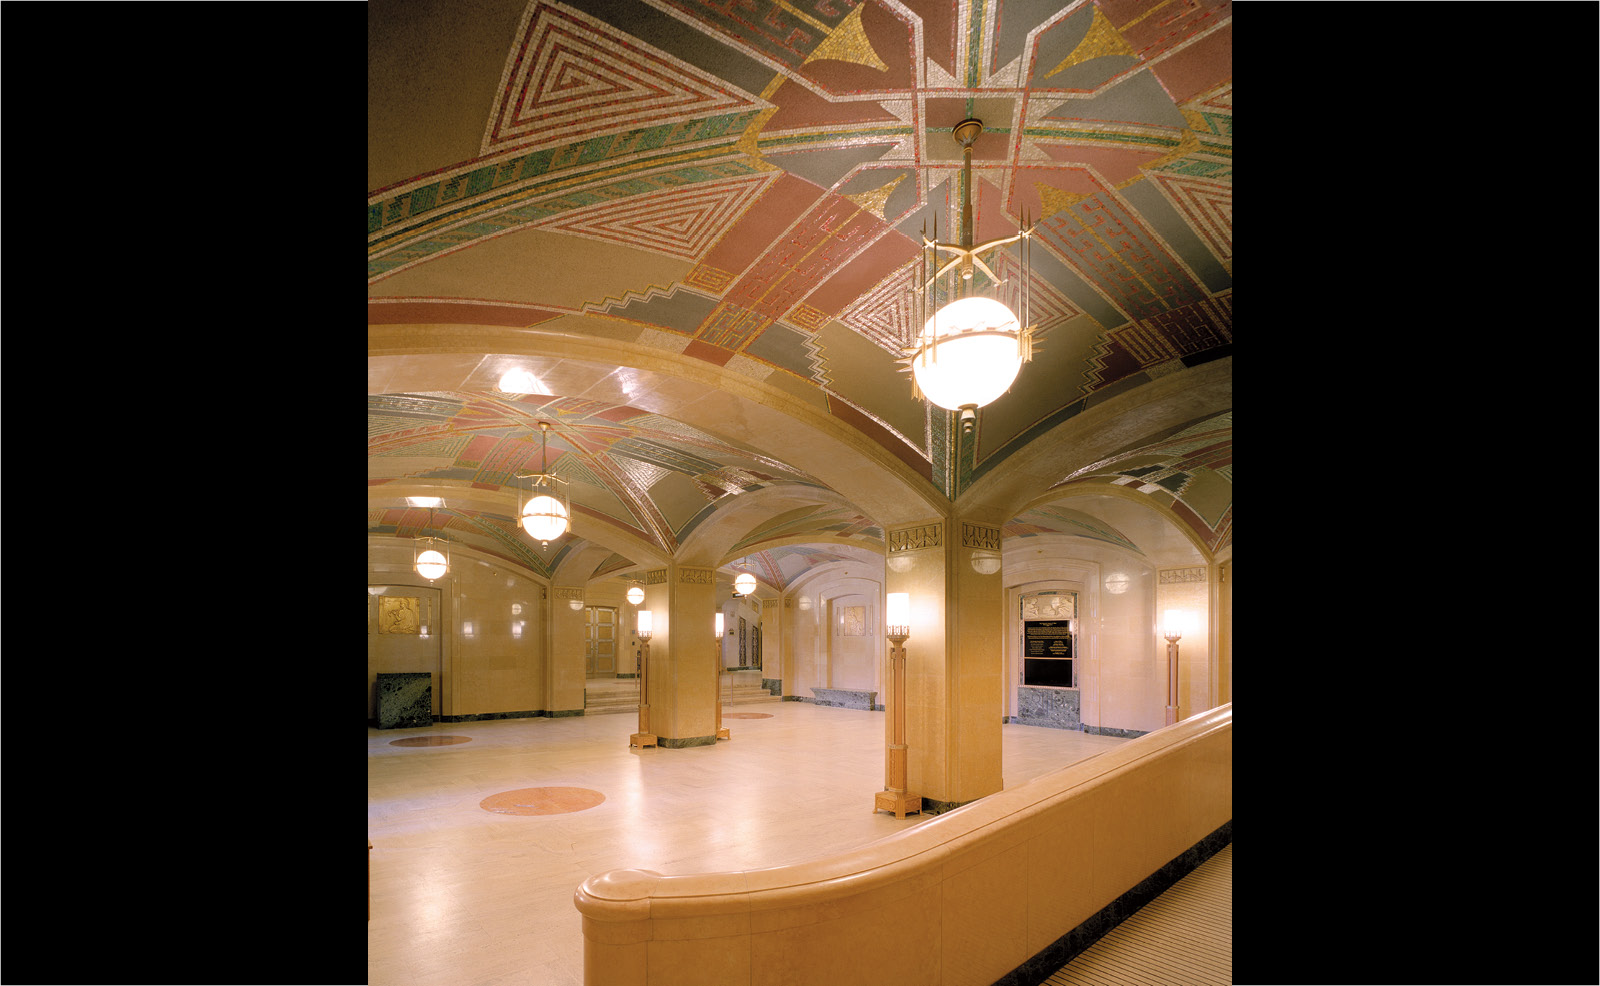 Image of the interior of the Civic Center Lobby